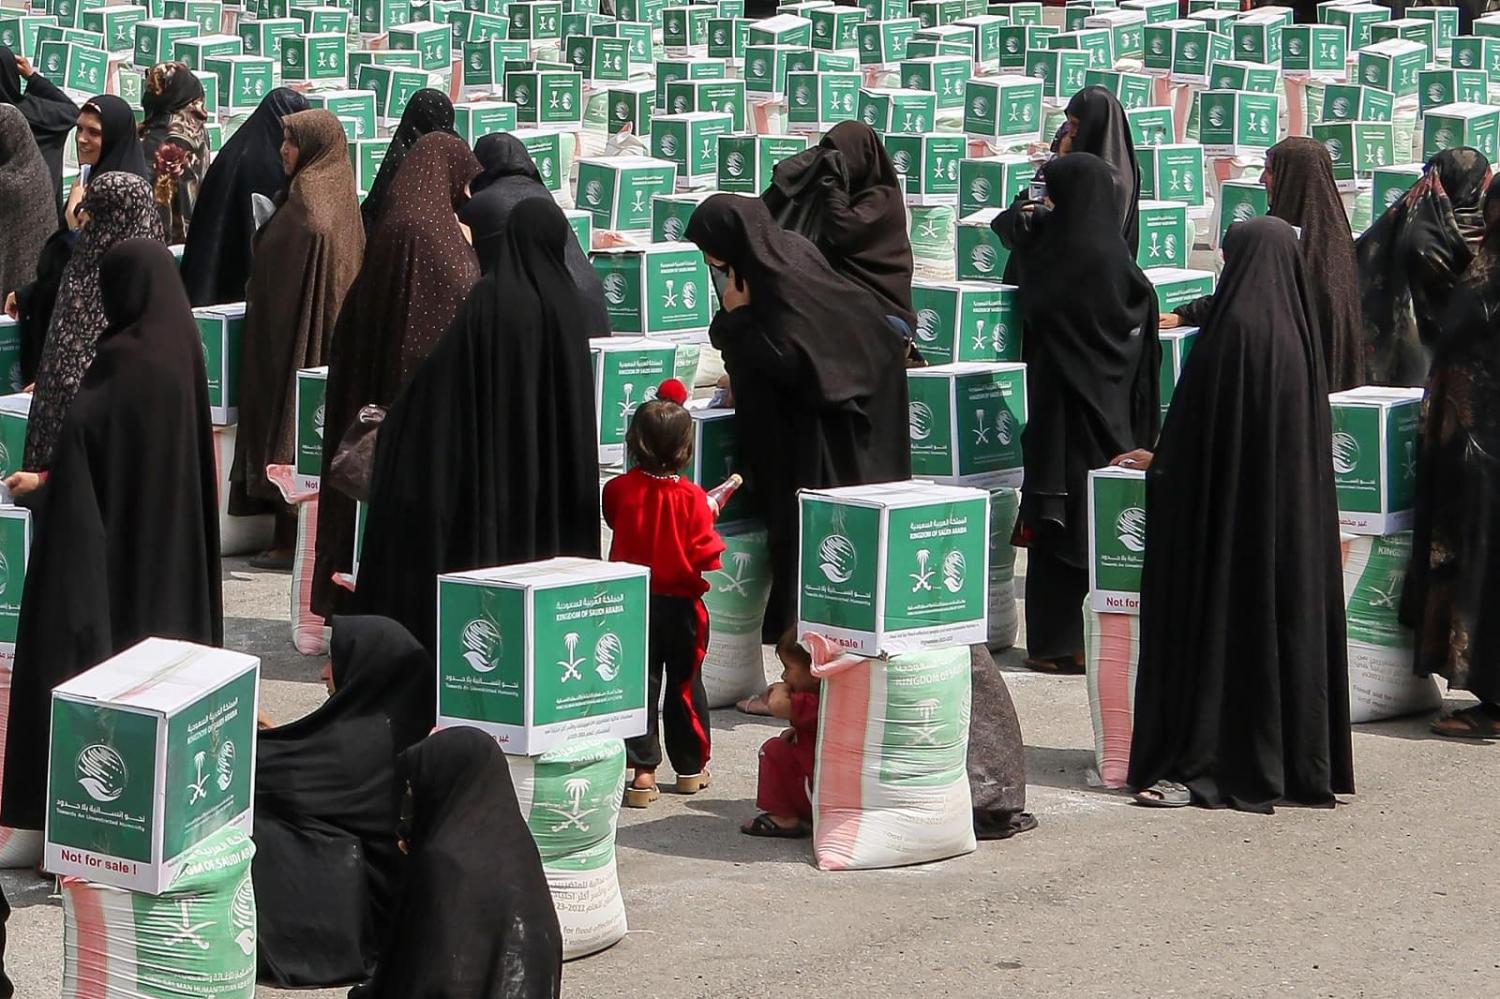 Afghan women gather around aid parcels containing food items distributed by the King Salman Humanitarian Aid and Relief Centre in Herat on 21 June 2023 (Mohsen Karimi/AFP via Getty Images)